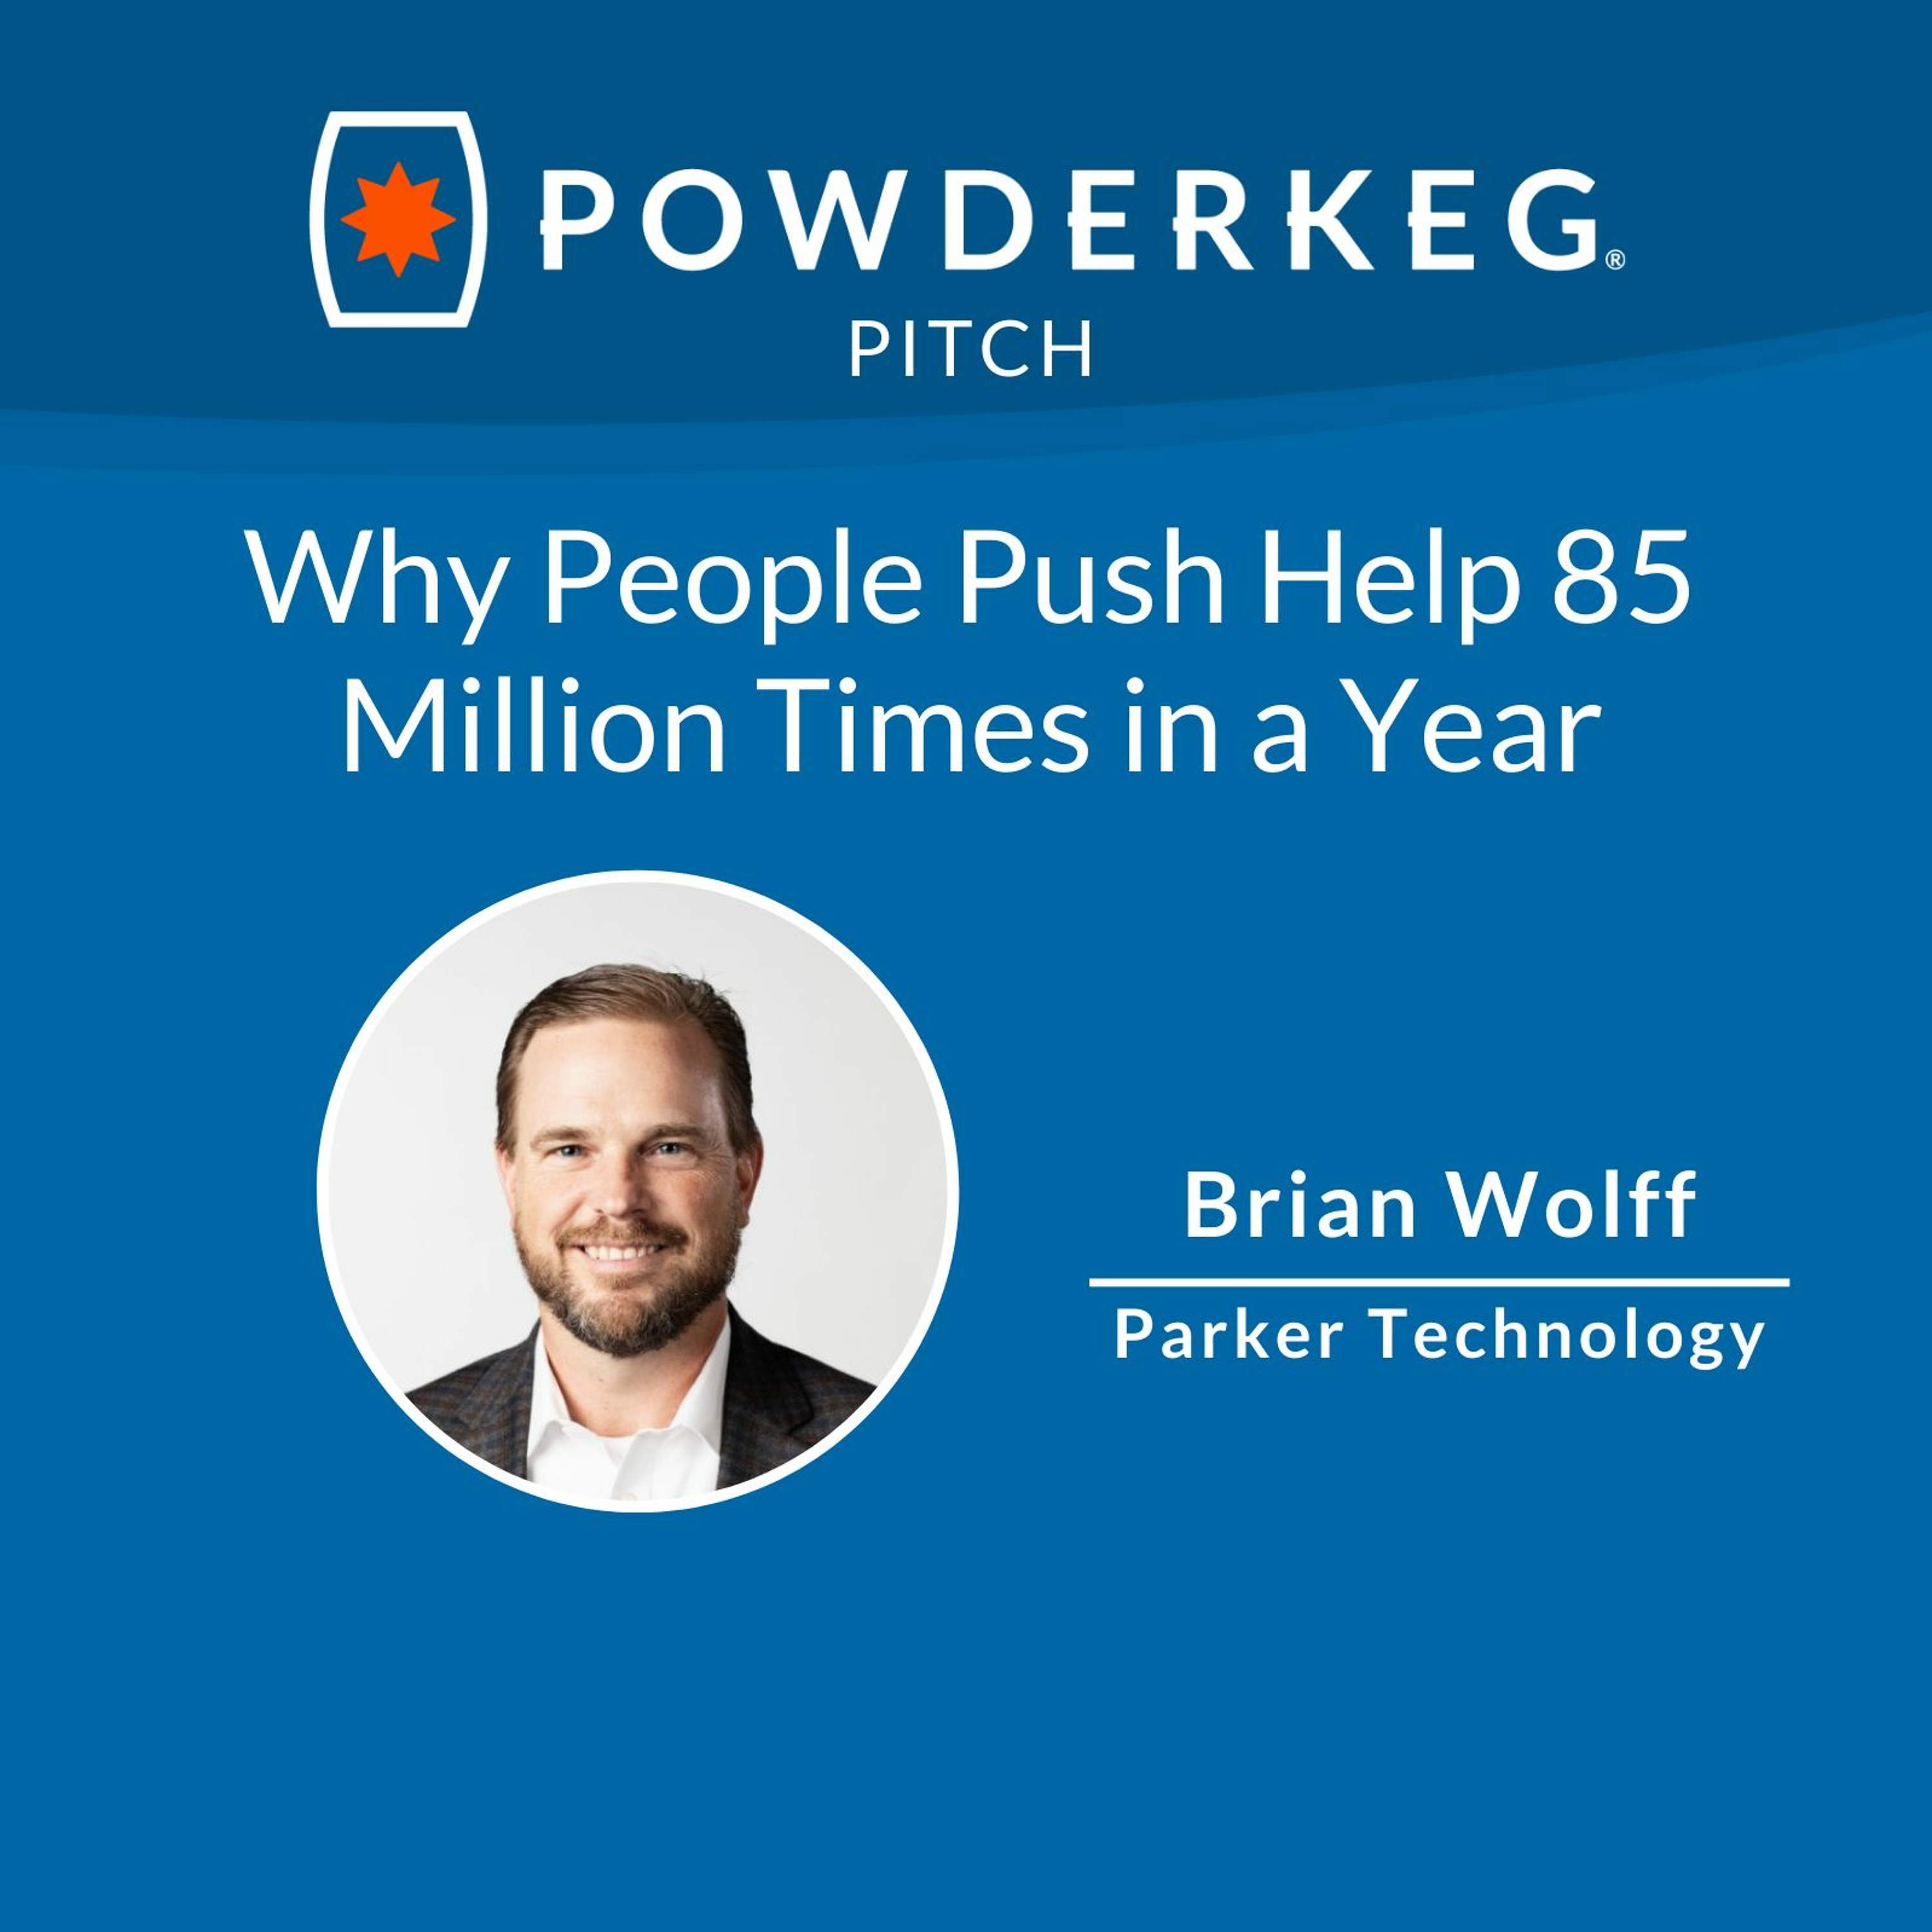 Why People Push Help 85 Million Times in a Year